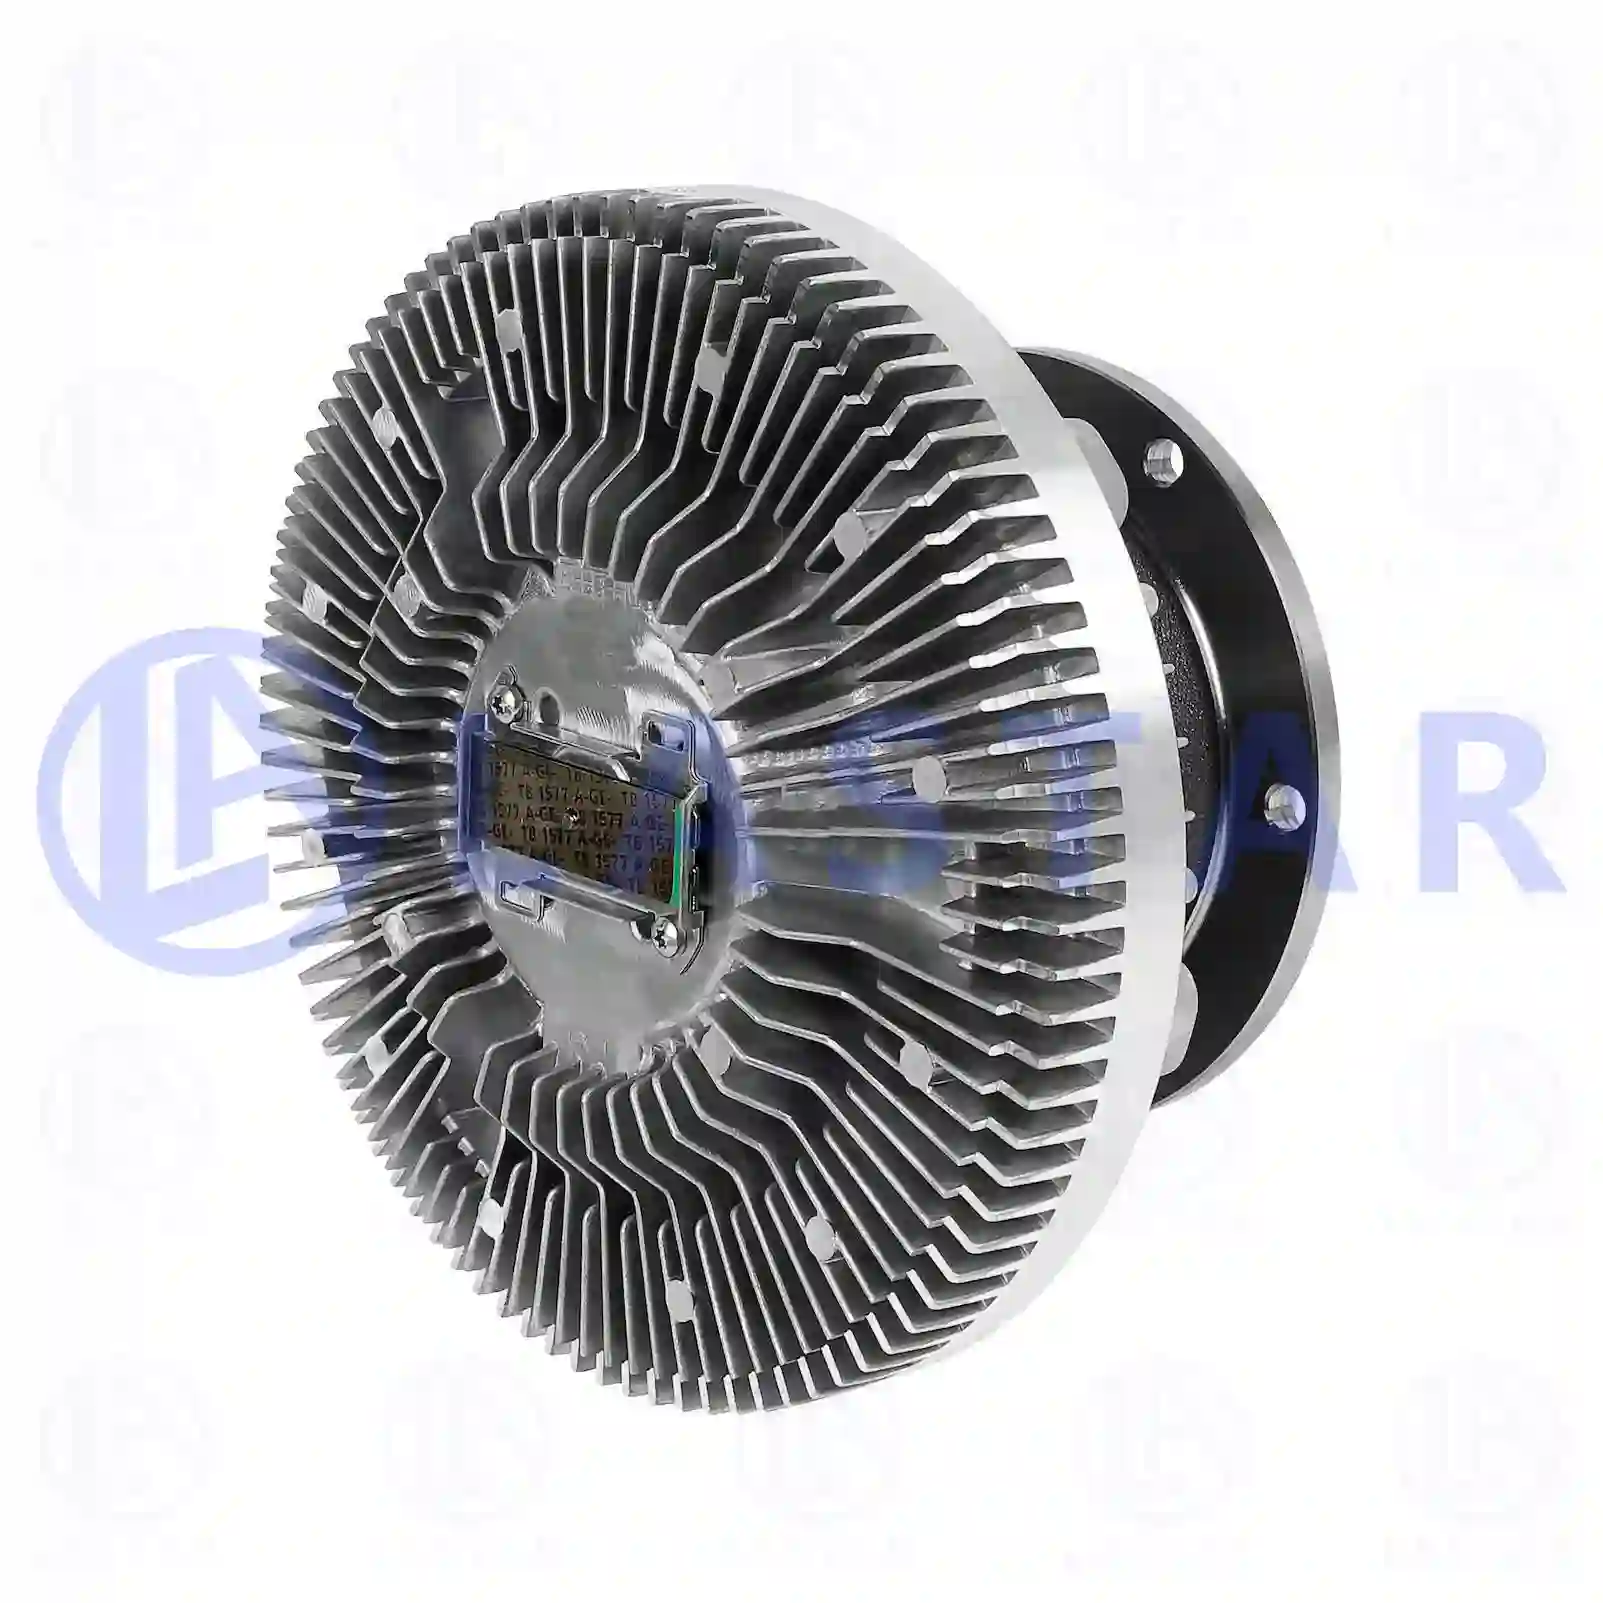 Fan clutch, 77707972, 2006722 ||  77707972 Lastar Spare Part | Truck Spare Parts, Auotomotive Spare Parts Fan clutch, 77707972, 2006722 ||  77707972 Lastar Spare Part | Truck Spare Parts, Auotomotive Spare Parts